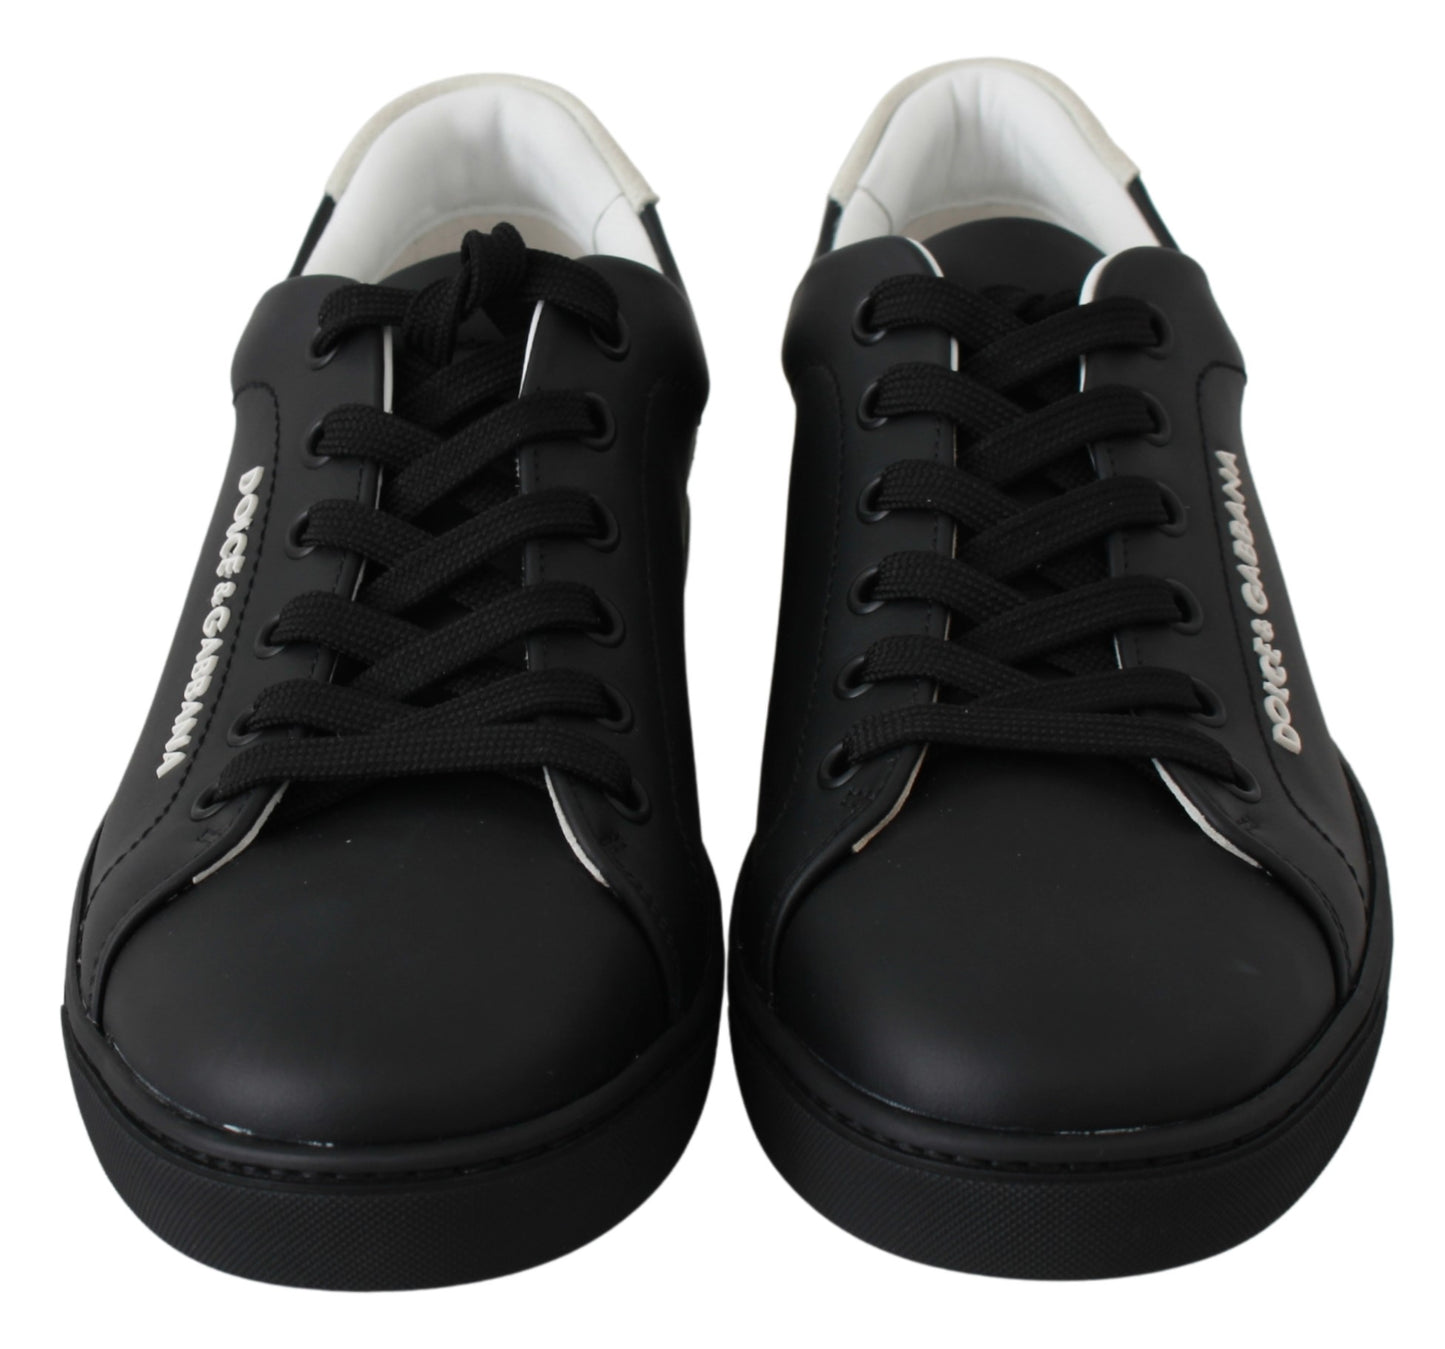 Black Leather Low Top Sneakers Shoes